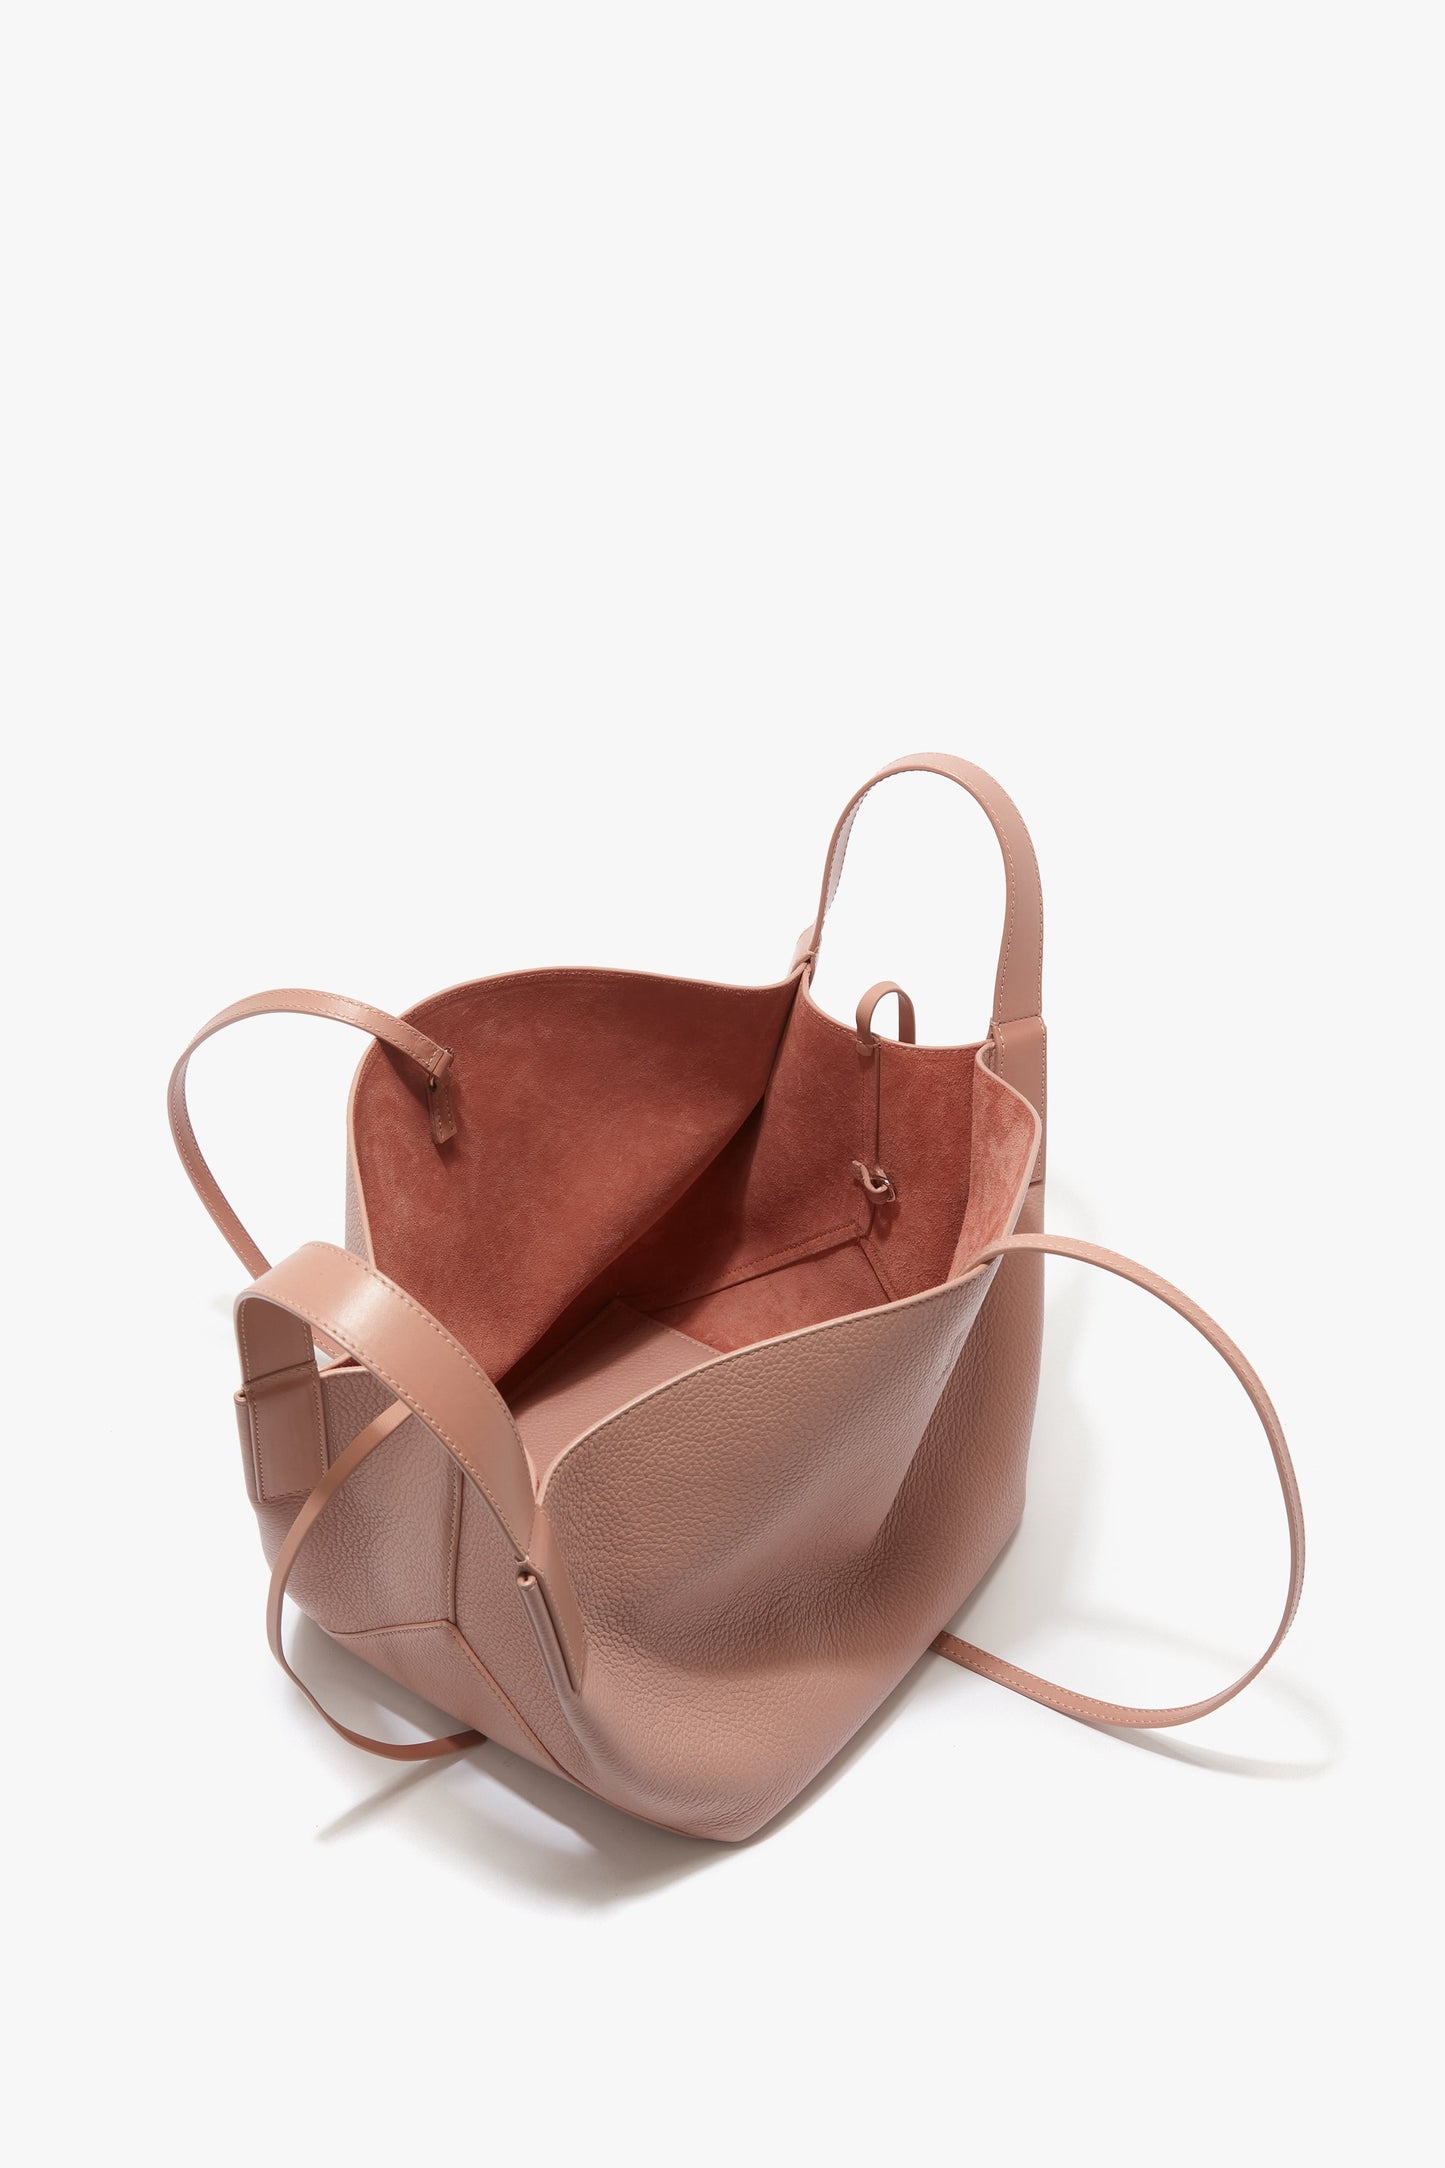 Open, dusky pink [**Victoria Beckham W11 Mini Tote Bag In Marshmallow Leather**] with thin shoulder straps and a spacious interior, showing a suede-like inner lining and a small attachment loop.